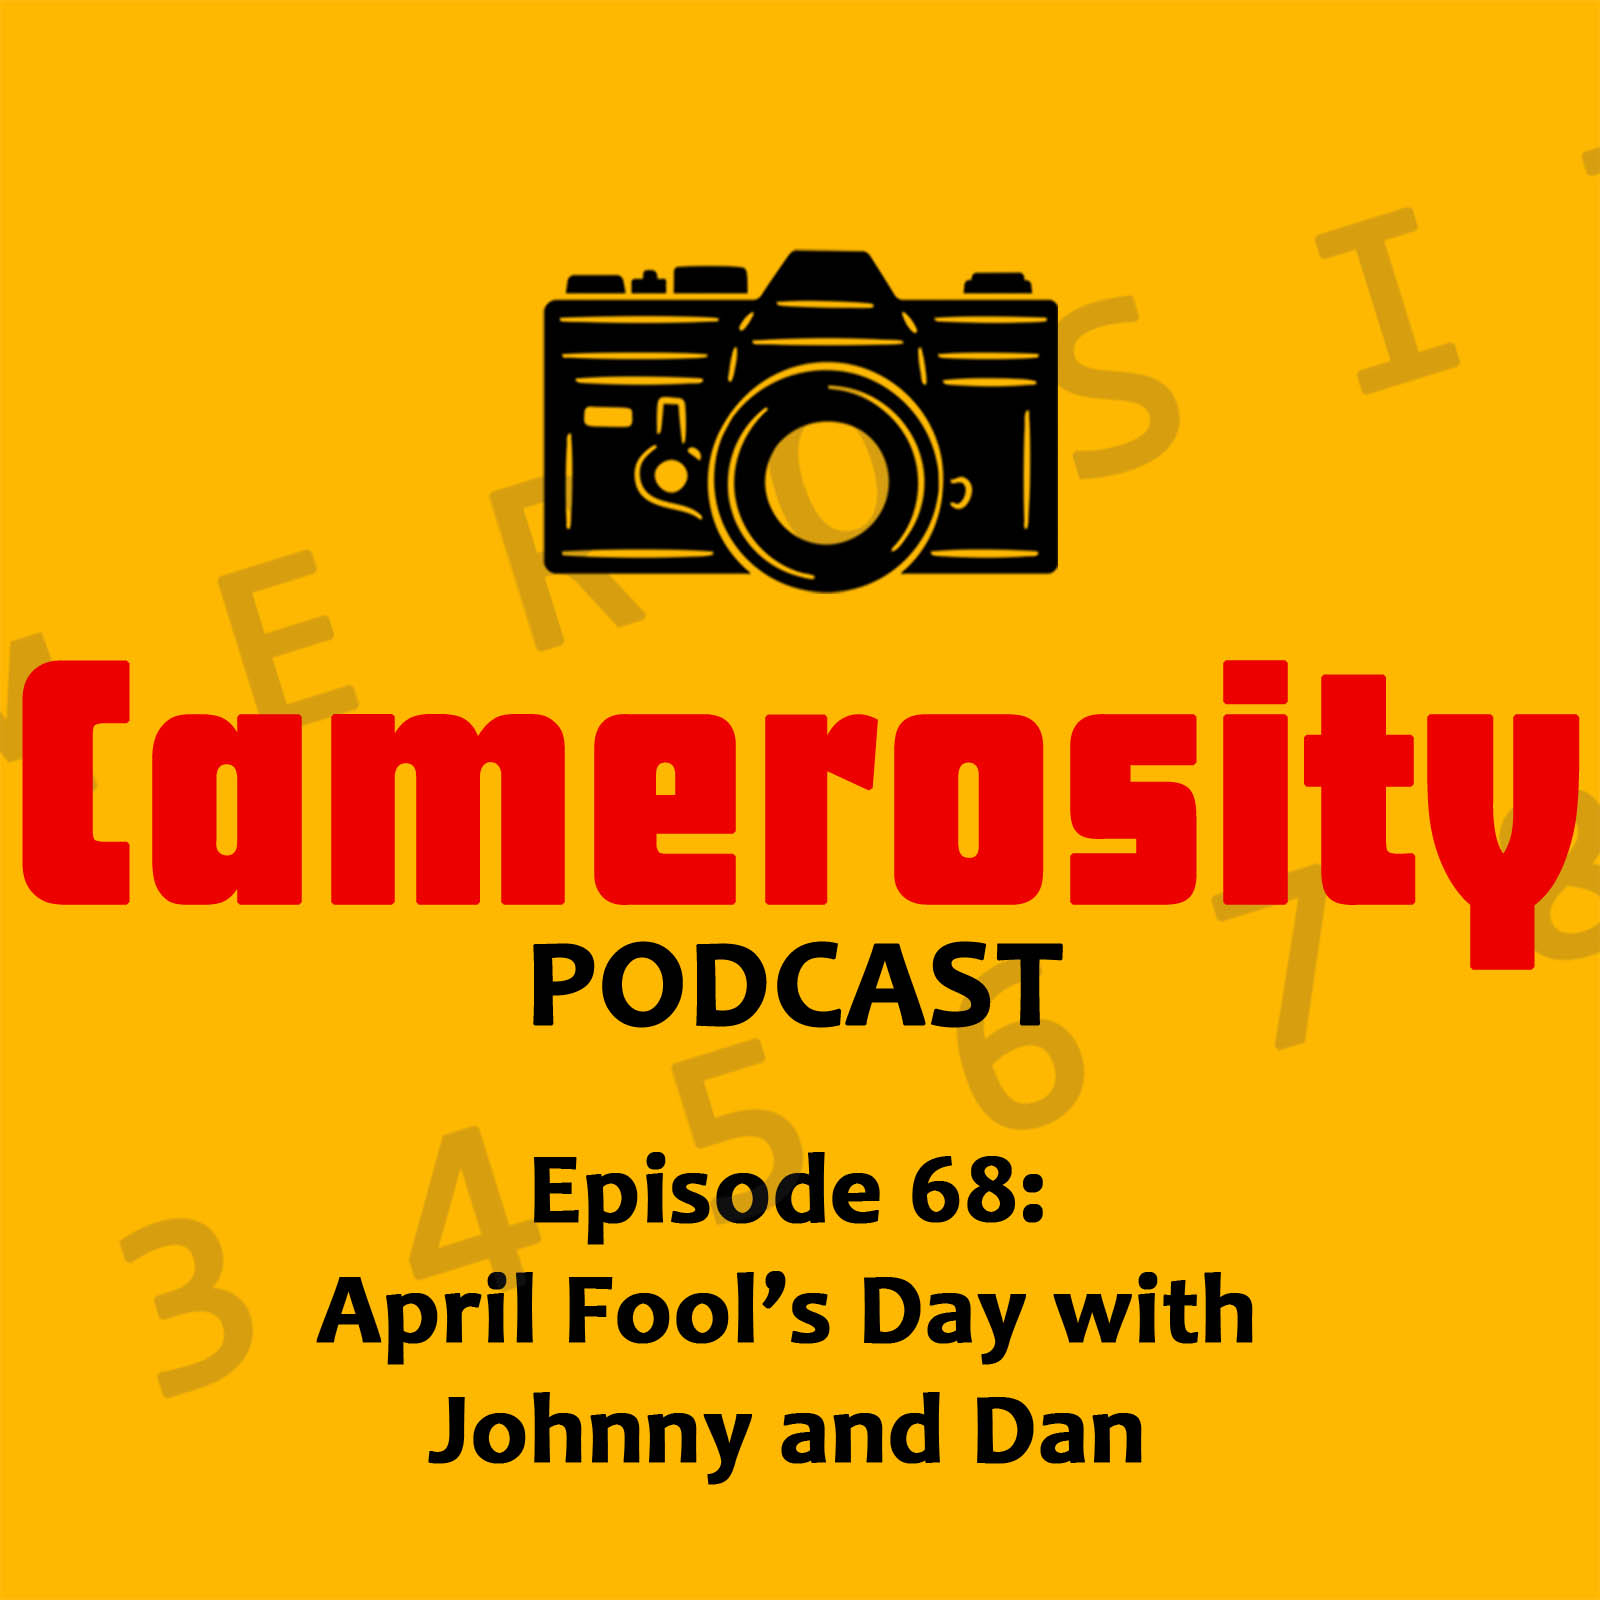 Episode 68: April Fool’s Day with Johnny and Dan